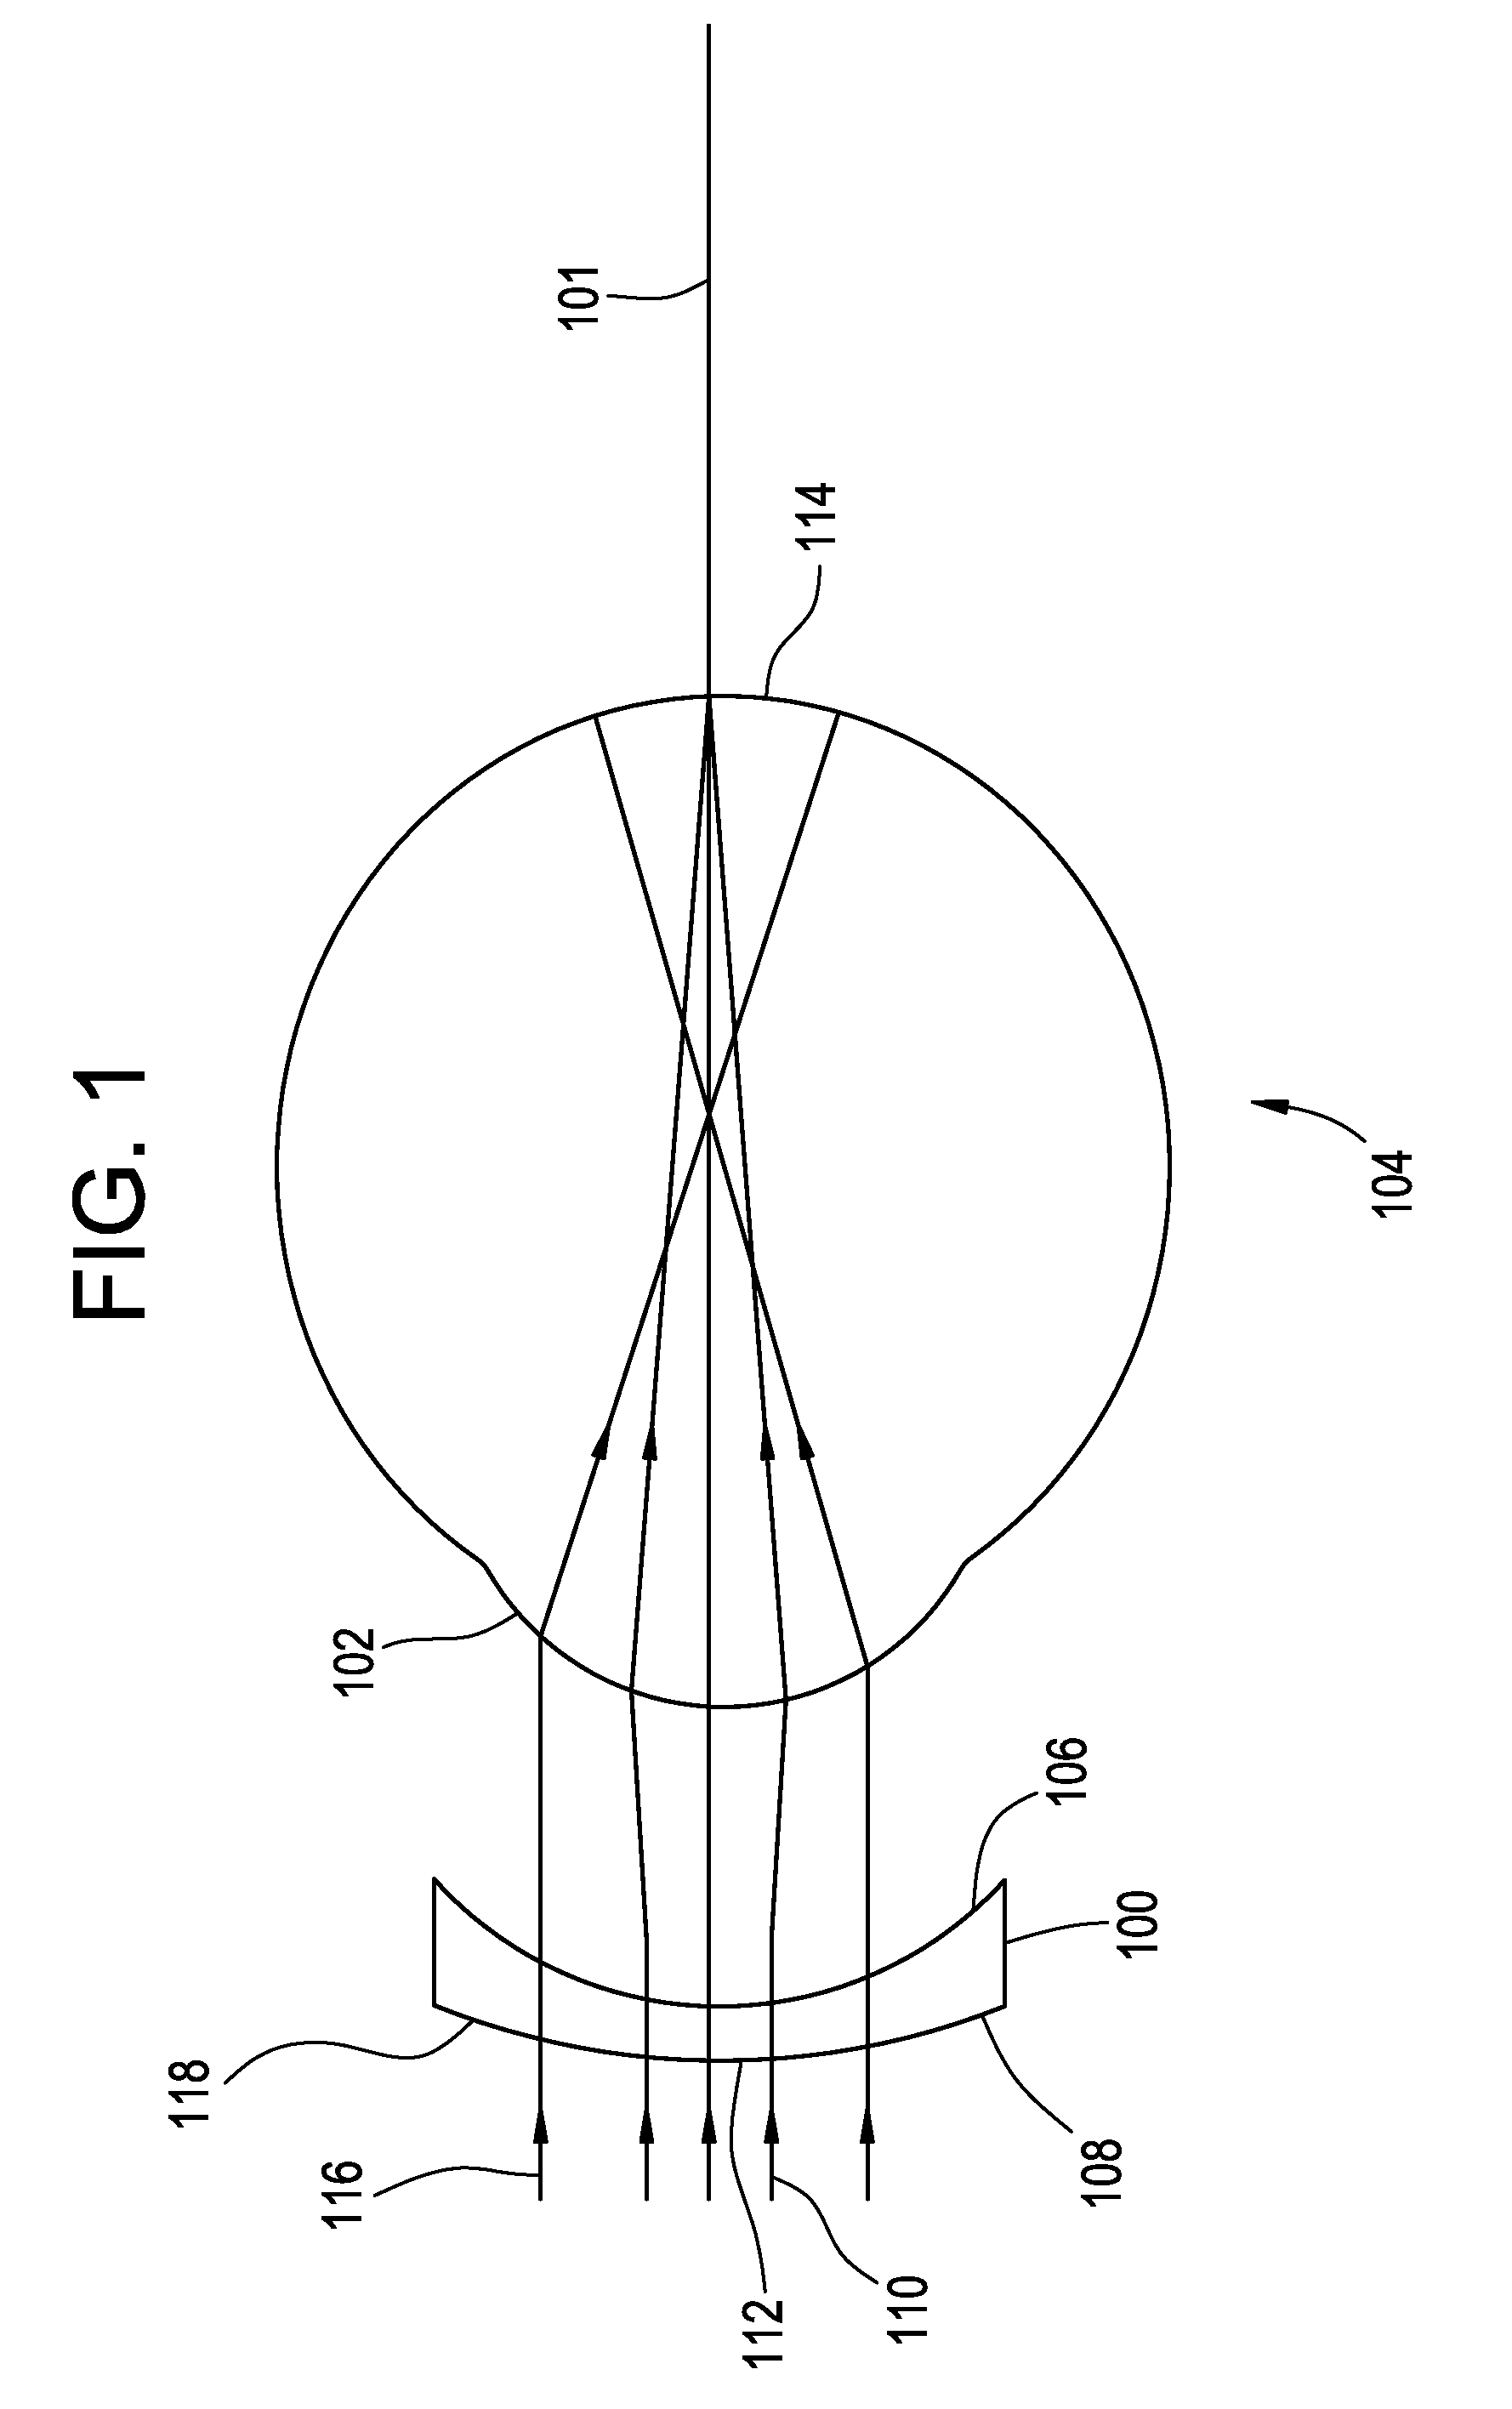 Asymmetric lens design and method for preventing and/or slowing myopia progression